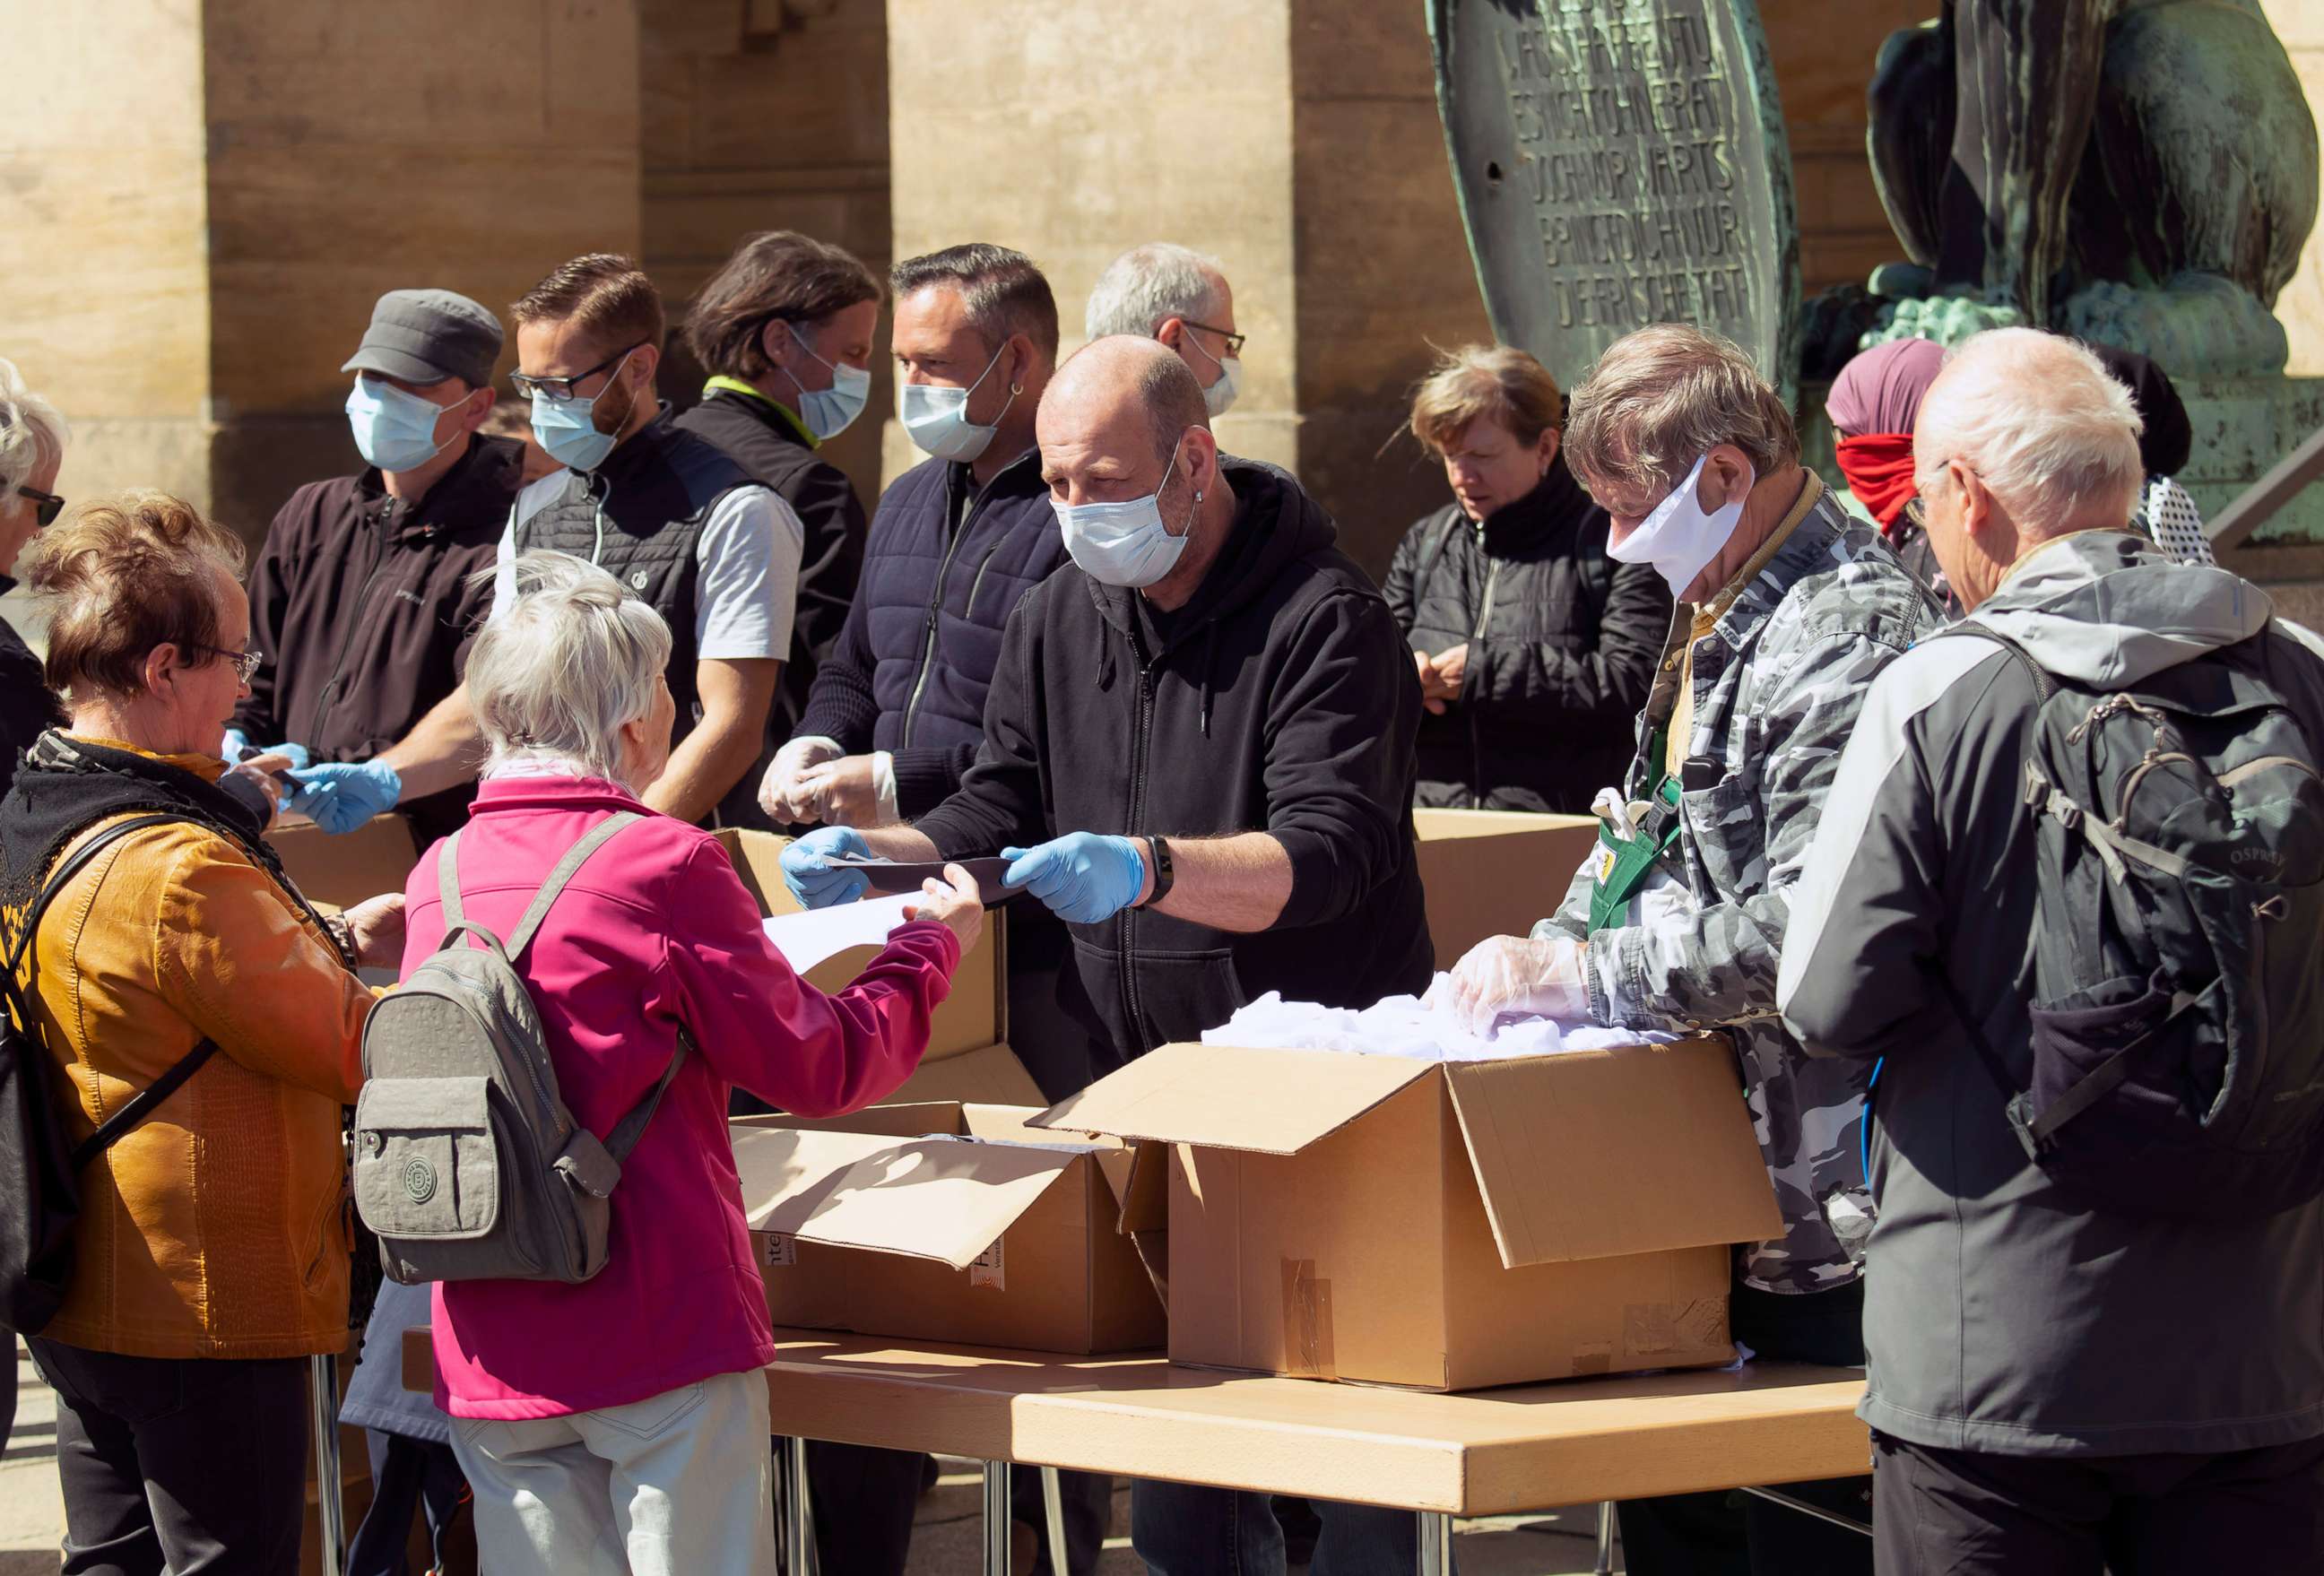 PHOTO: City administration helpers hand out face masks in Dresden, eastern Germany, April 20, 2020.